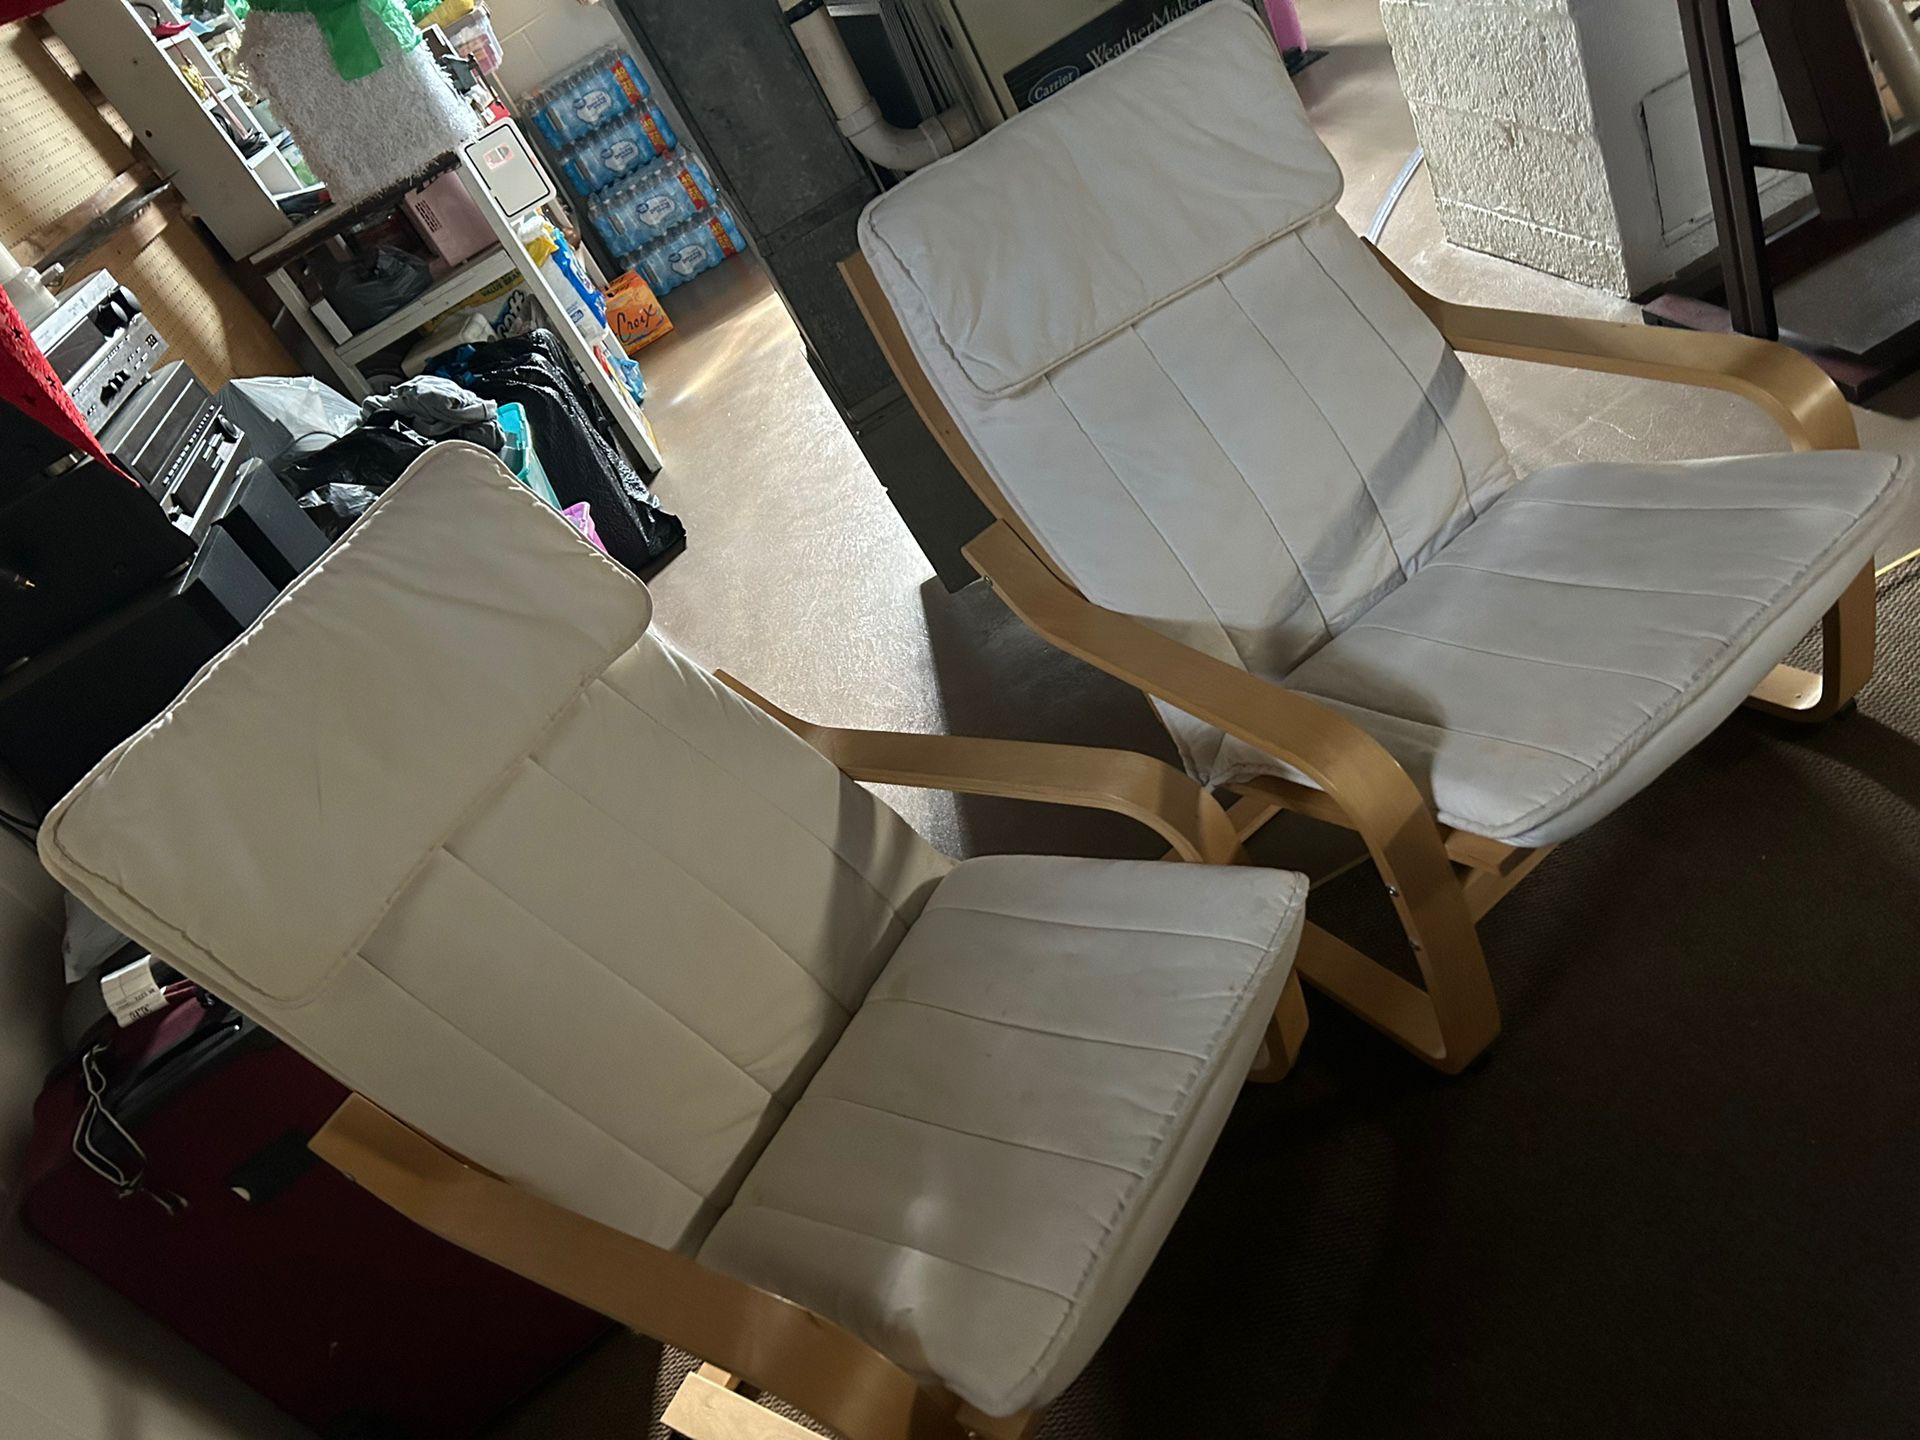 IKEA Wooden Arm Chairs (2) 